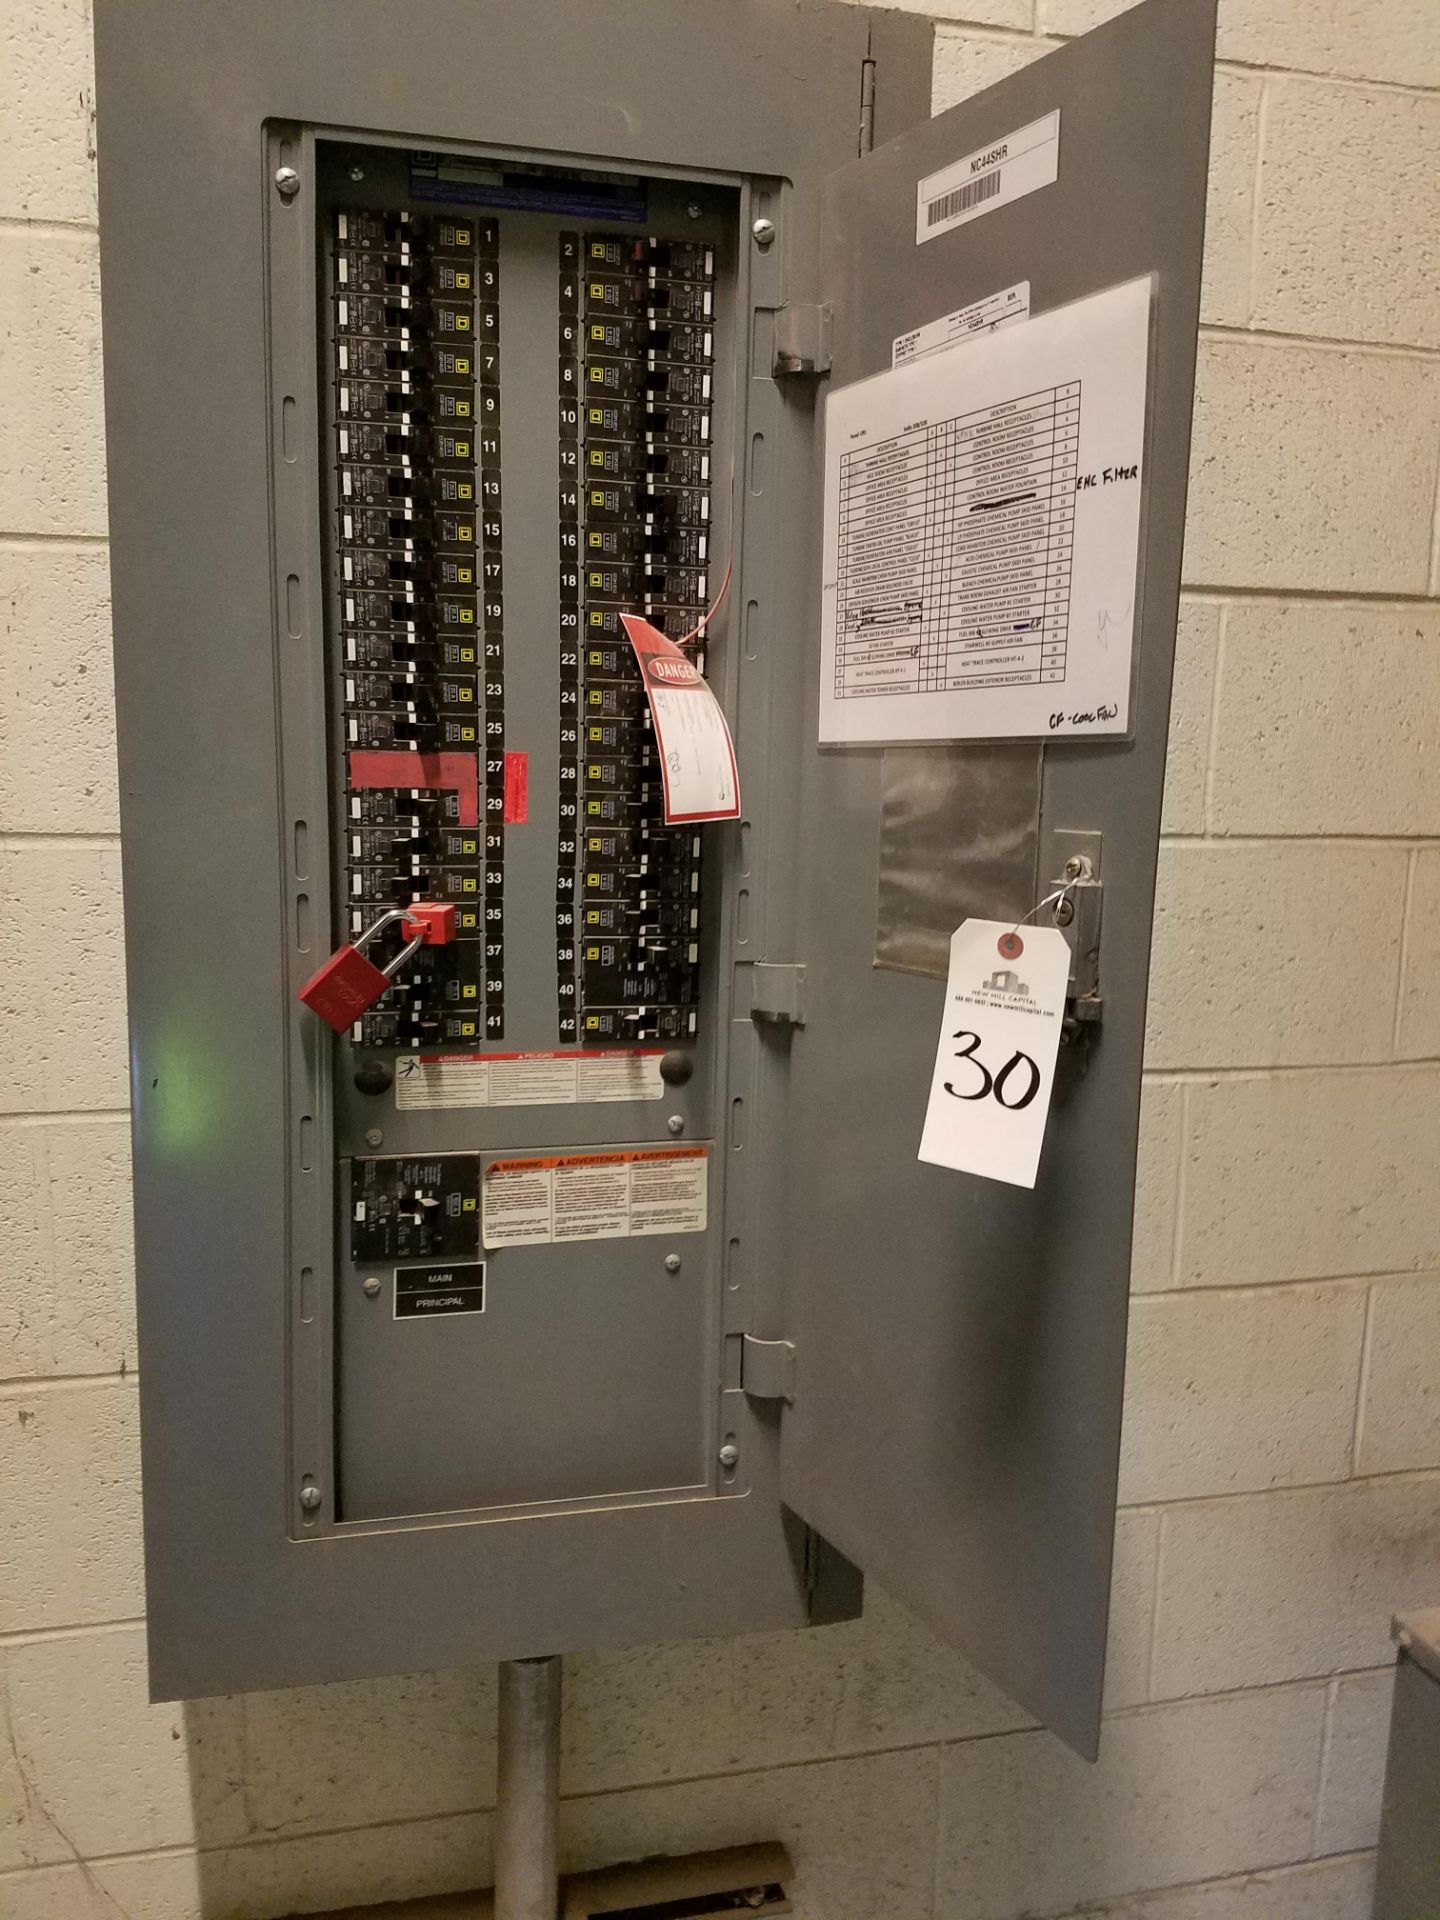 Square D Electrical Breaker Panel | Rig Fee: $100